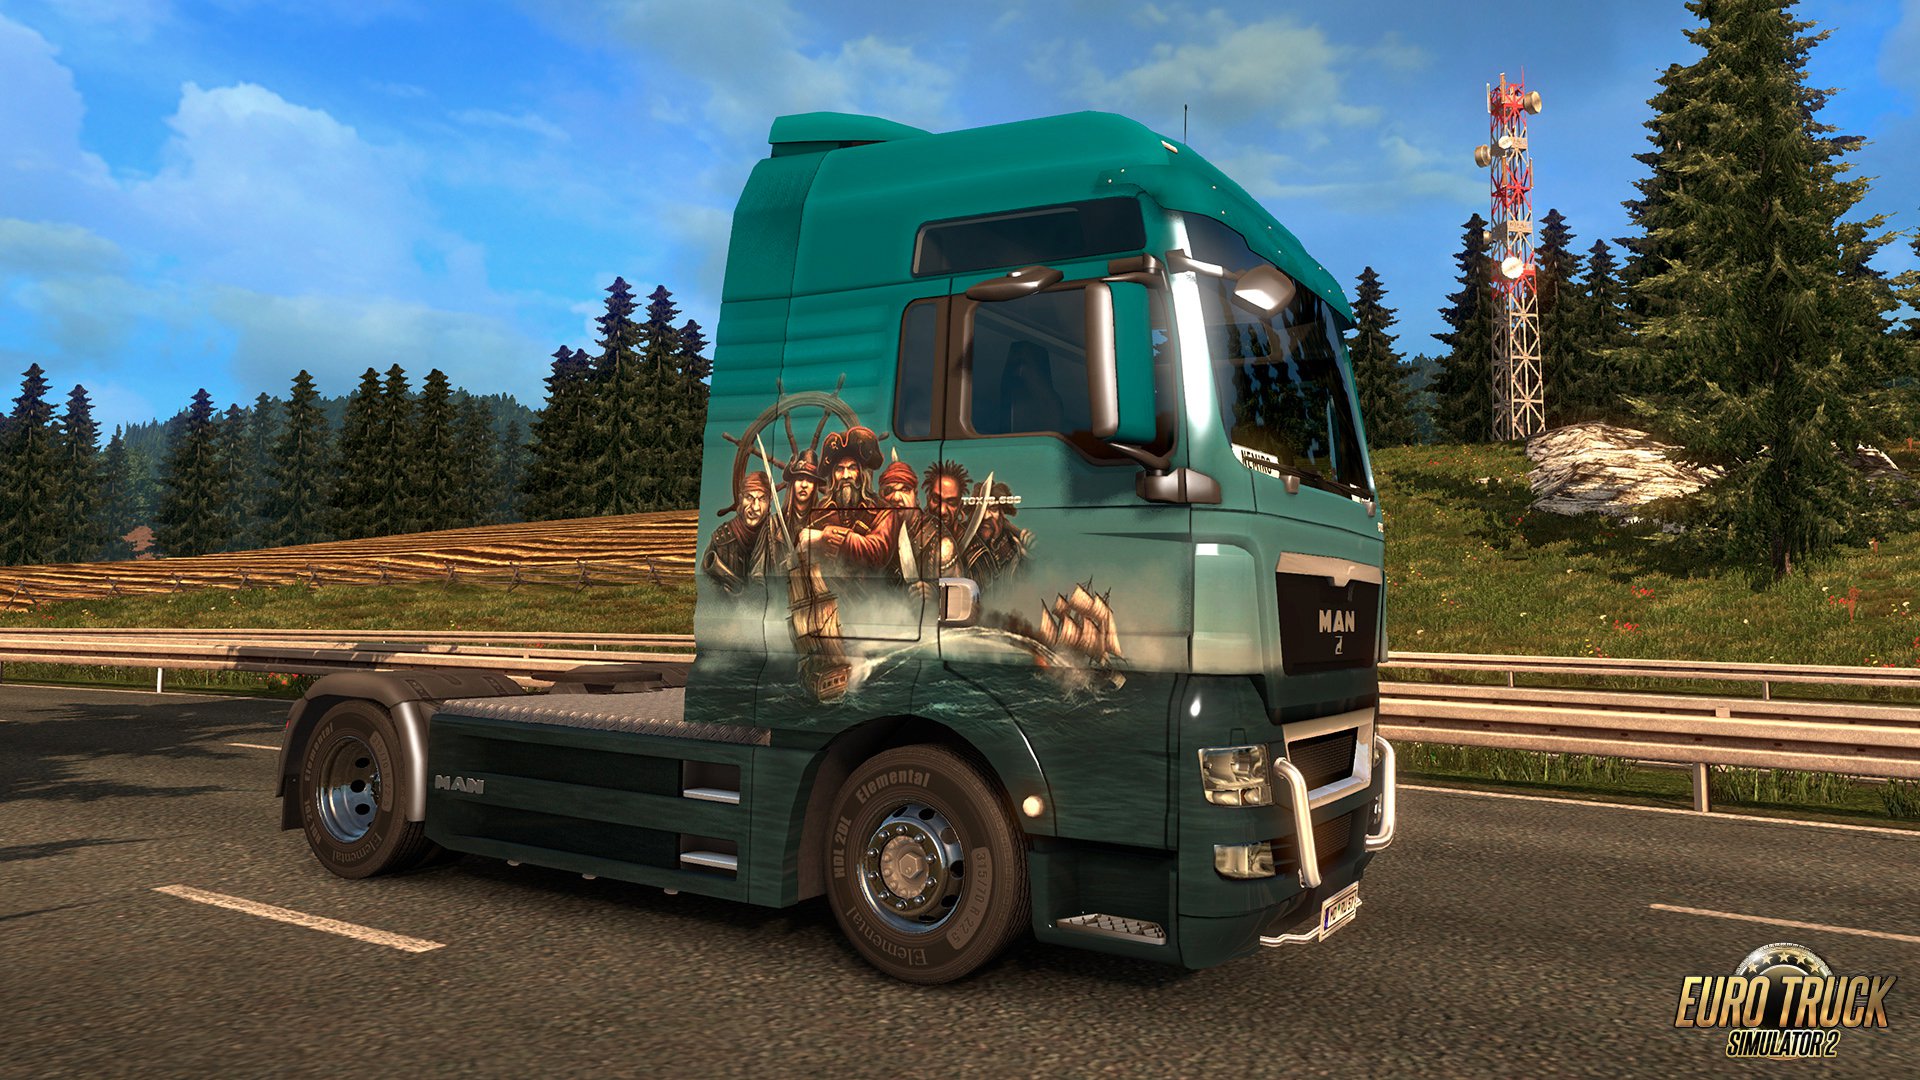 Euro Truck Simulátor 2 Pirate Paint Jobs Pack 5